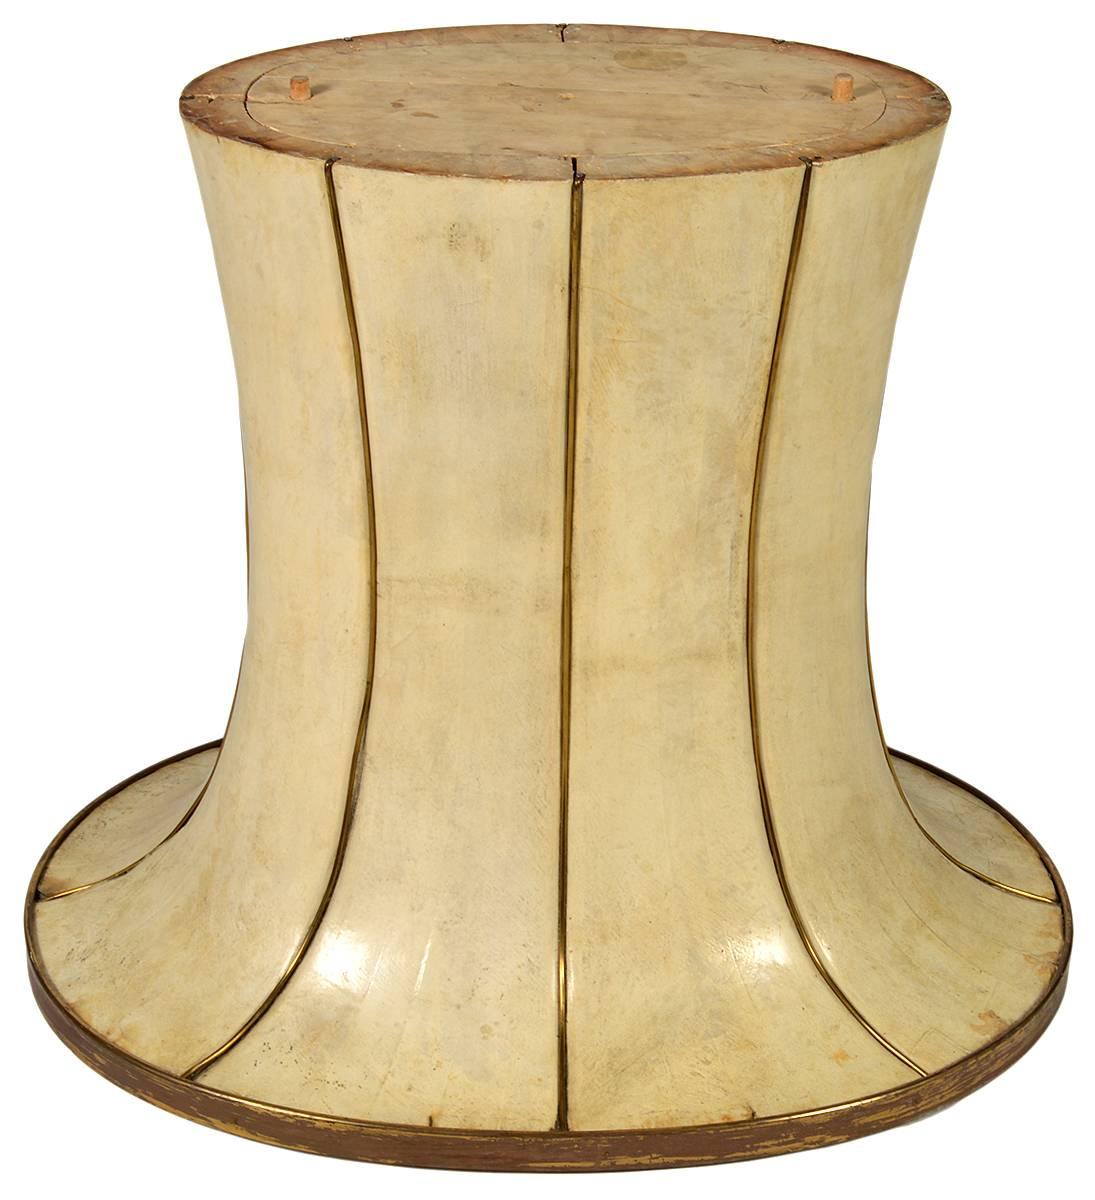 French parchment dining table. Pedestal base with brass adornments. Art Deco of the period. From a prominent collector. We have a glass top for it.